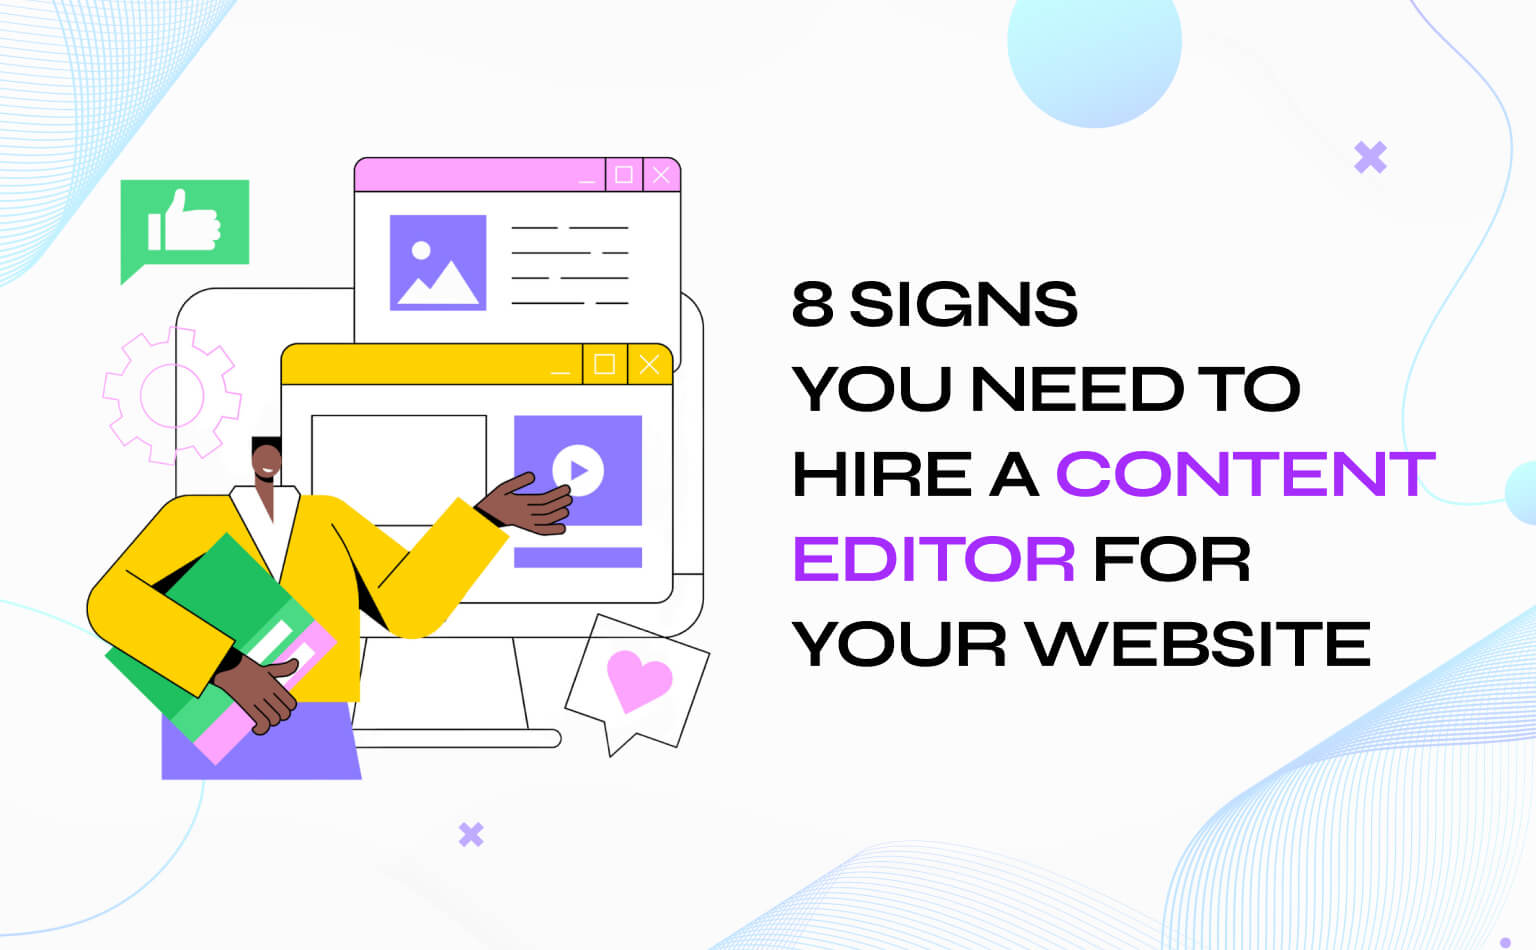 8 Signs you need to hire a Content Editor for your website